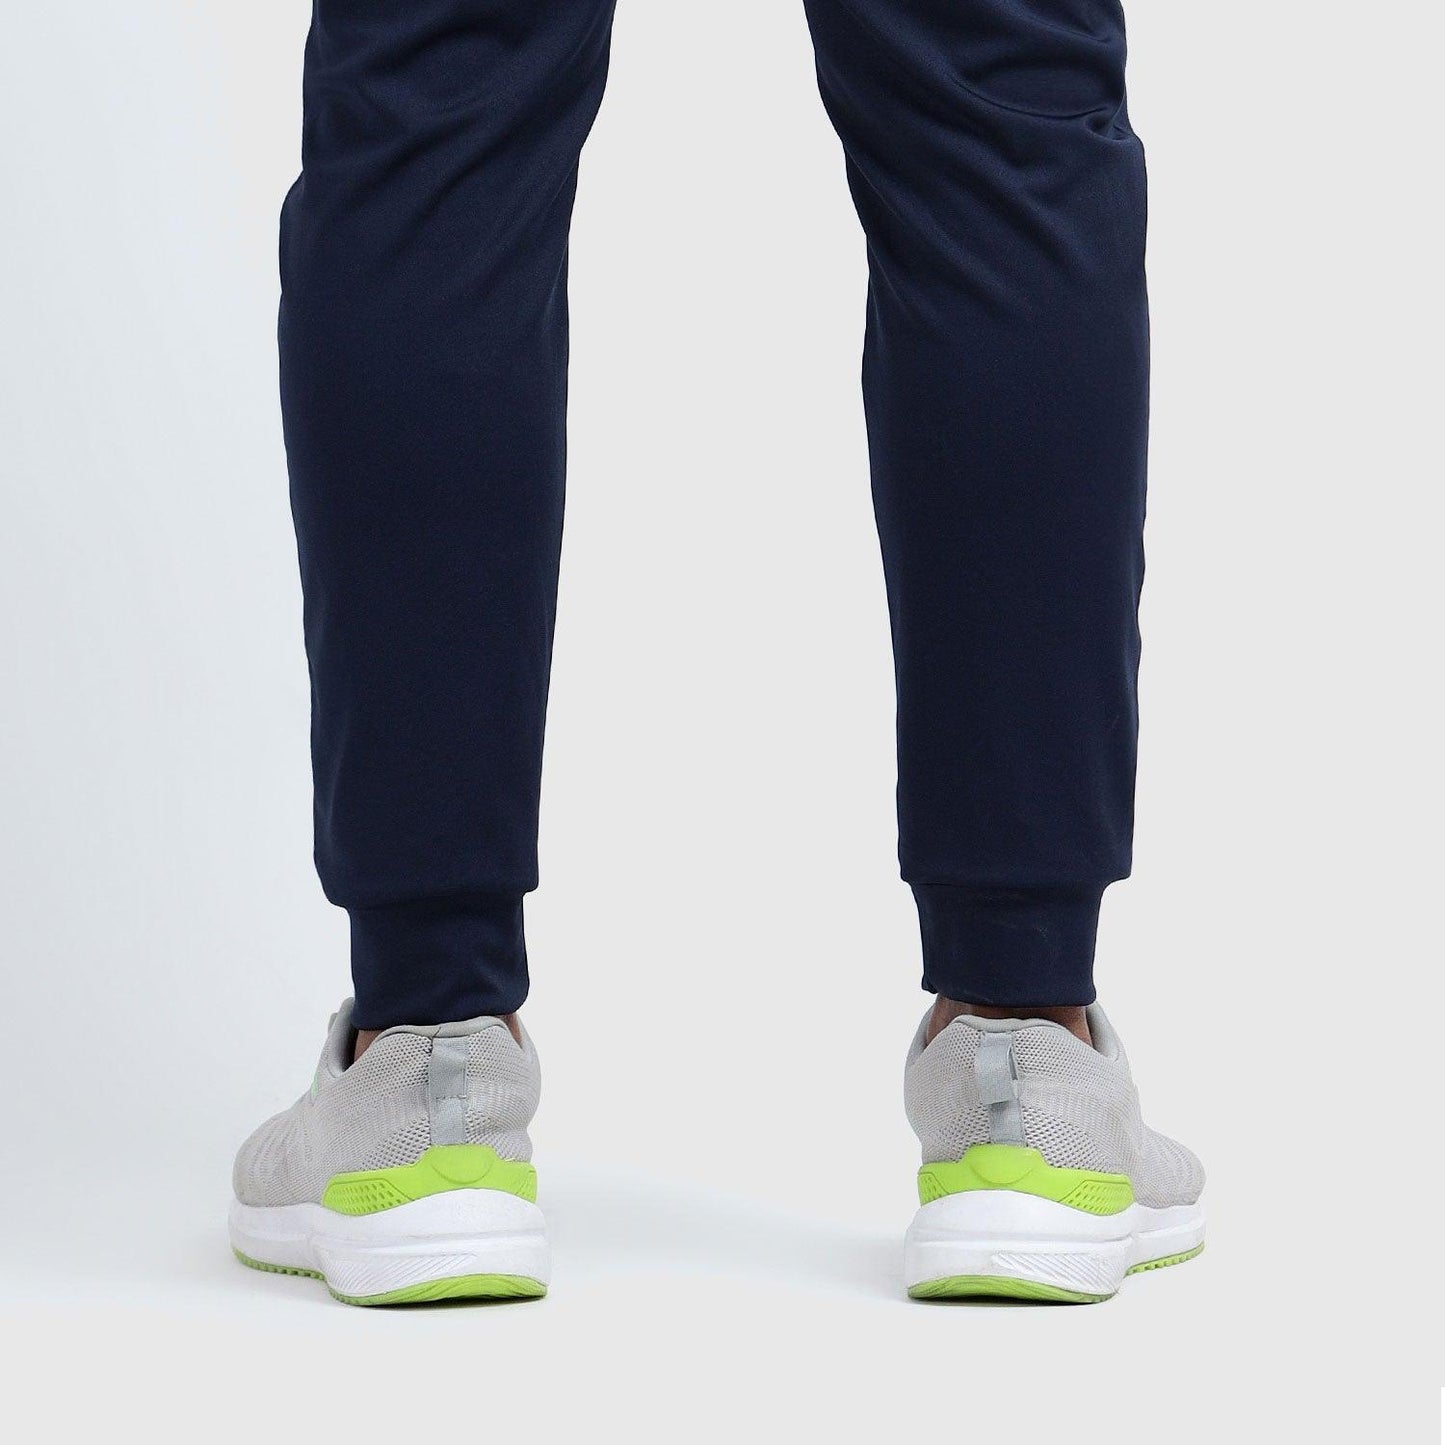 Denmonk: Elevate your look with these Power joggers sharp midnight navy joggers for mens.